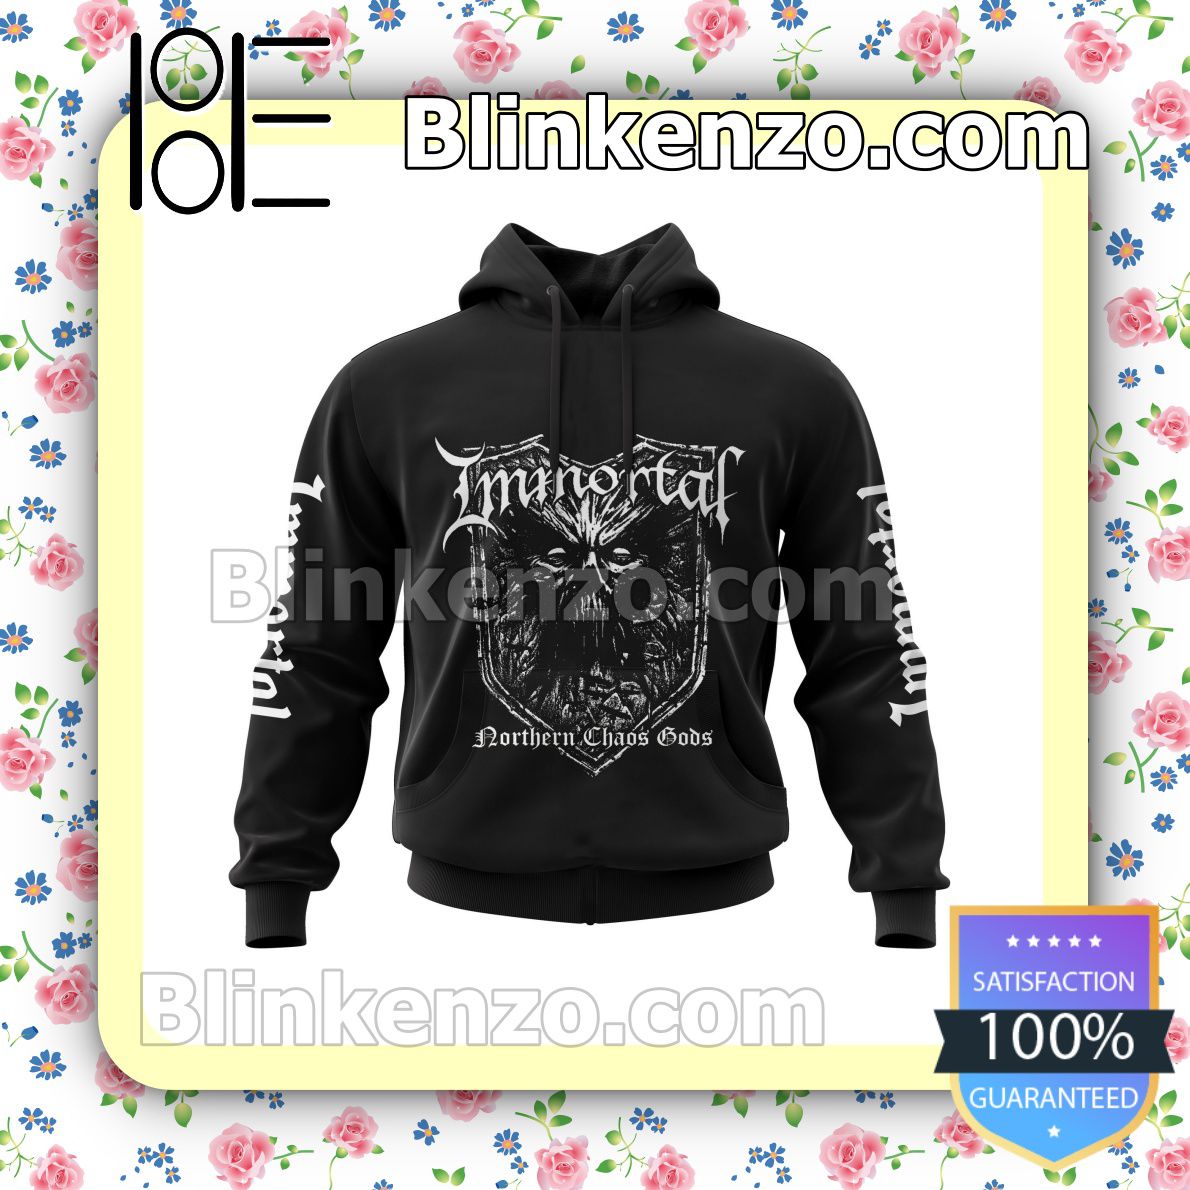 Personalized Immortal Northern Chaos Gods Album Cover Hooded Sweatshirt